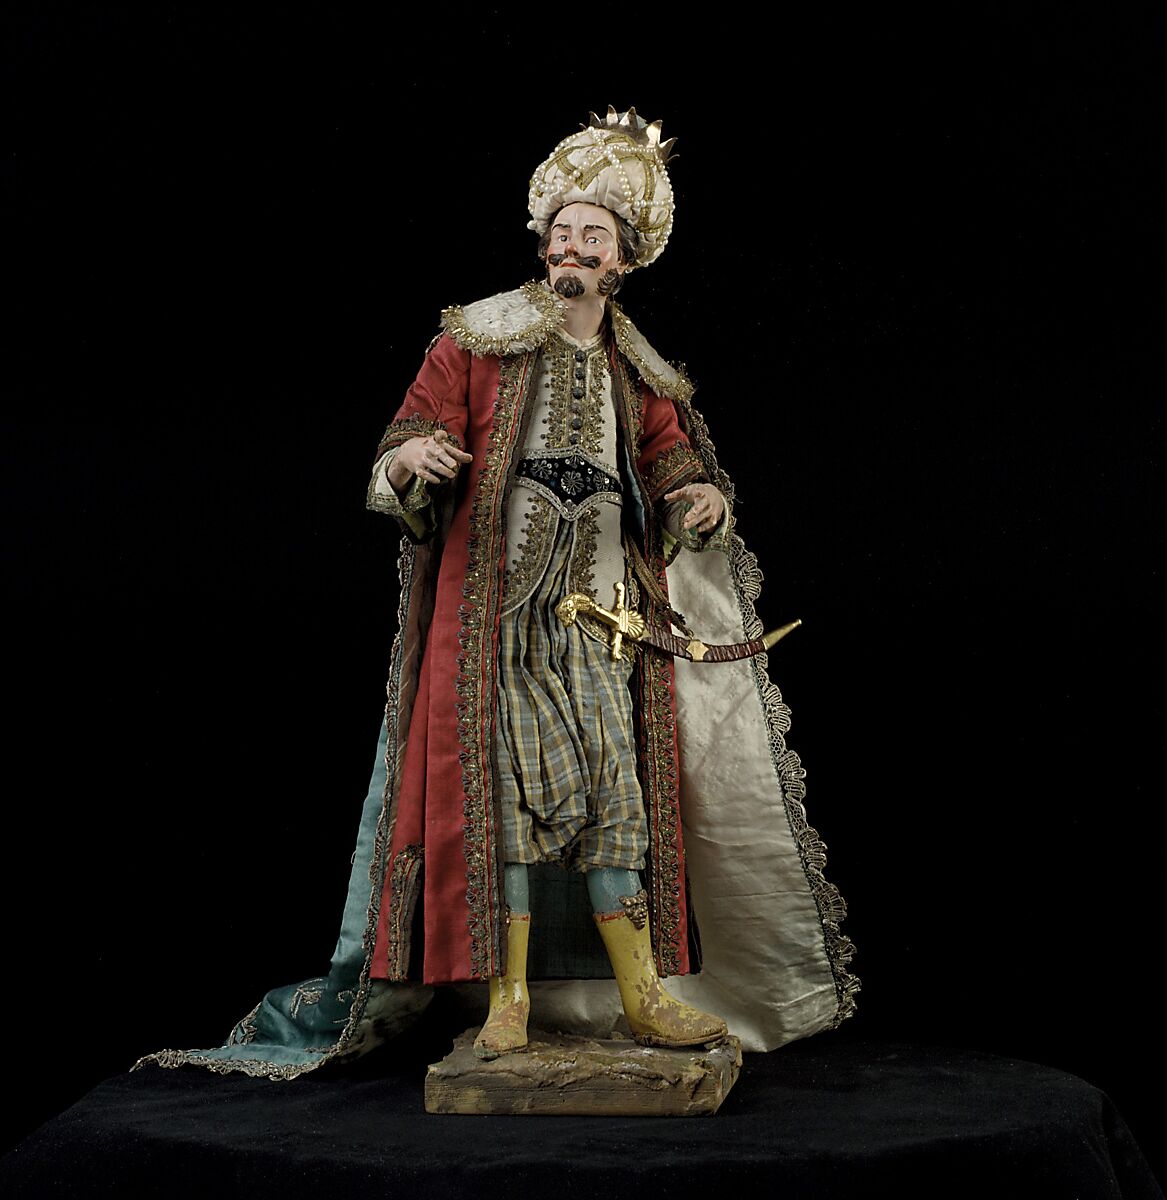 King, Nicola Ingaldi, Polychromed terracotta head and wooden limbs; body of wire wrapped in tow; satin, silk and velvet garments; silver and metallic thread; silver-gilt sword and crown; leather sheath, Italian, Naples